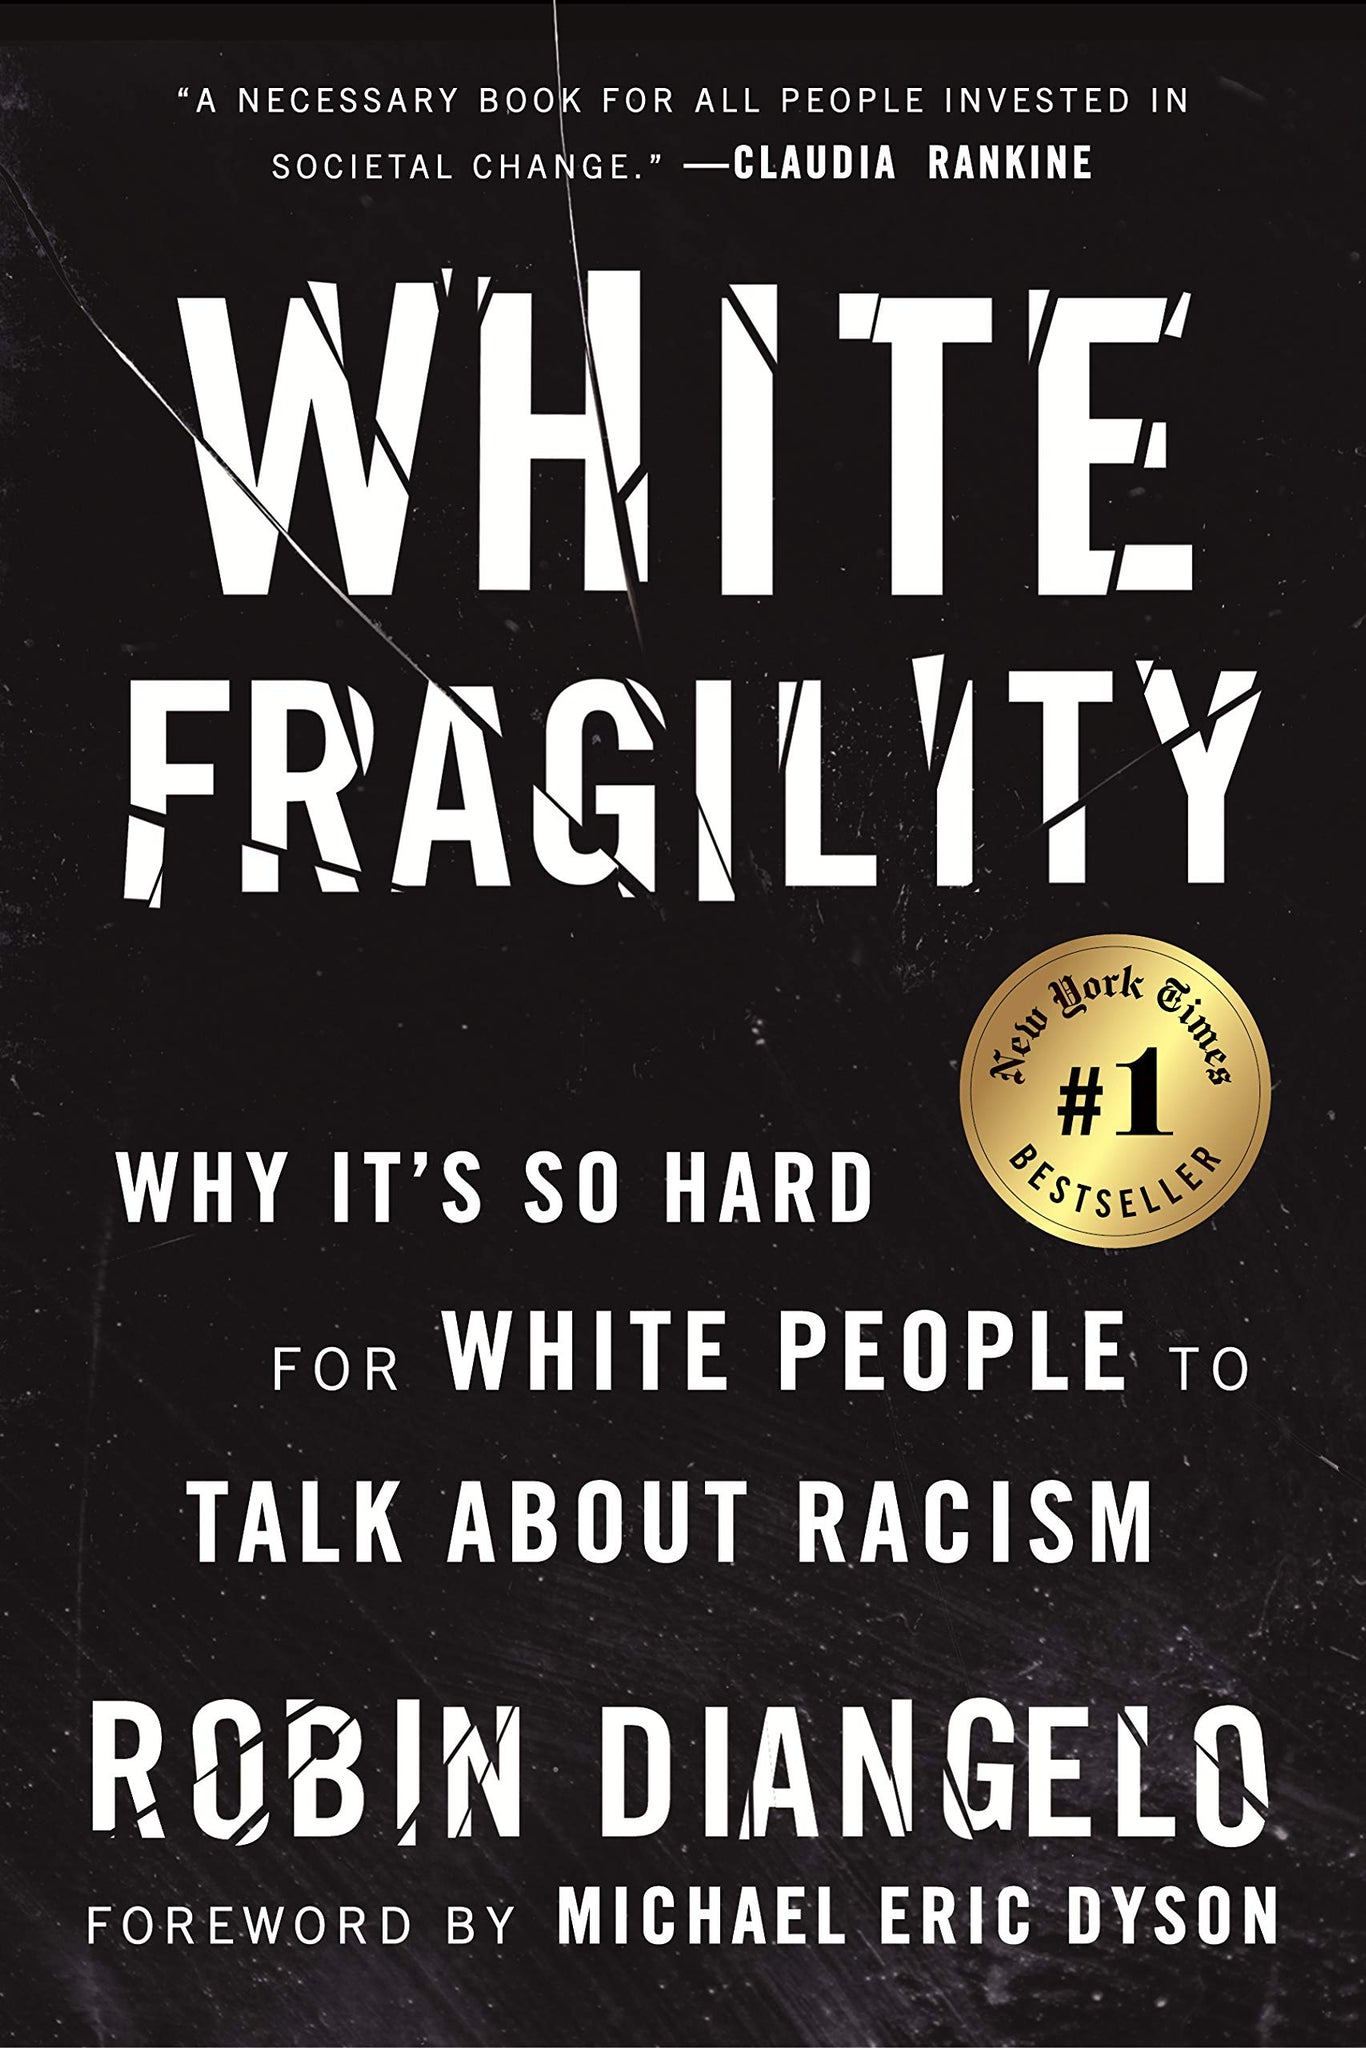 White Fragility: Why It’s So Hard for White People to Talk About Racism by Robin DiAngelo,  Michael Eric Dyson (Foreword), Amy Landon (Narrator)